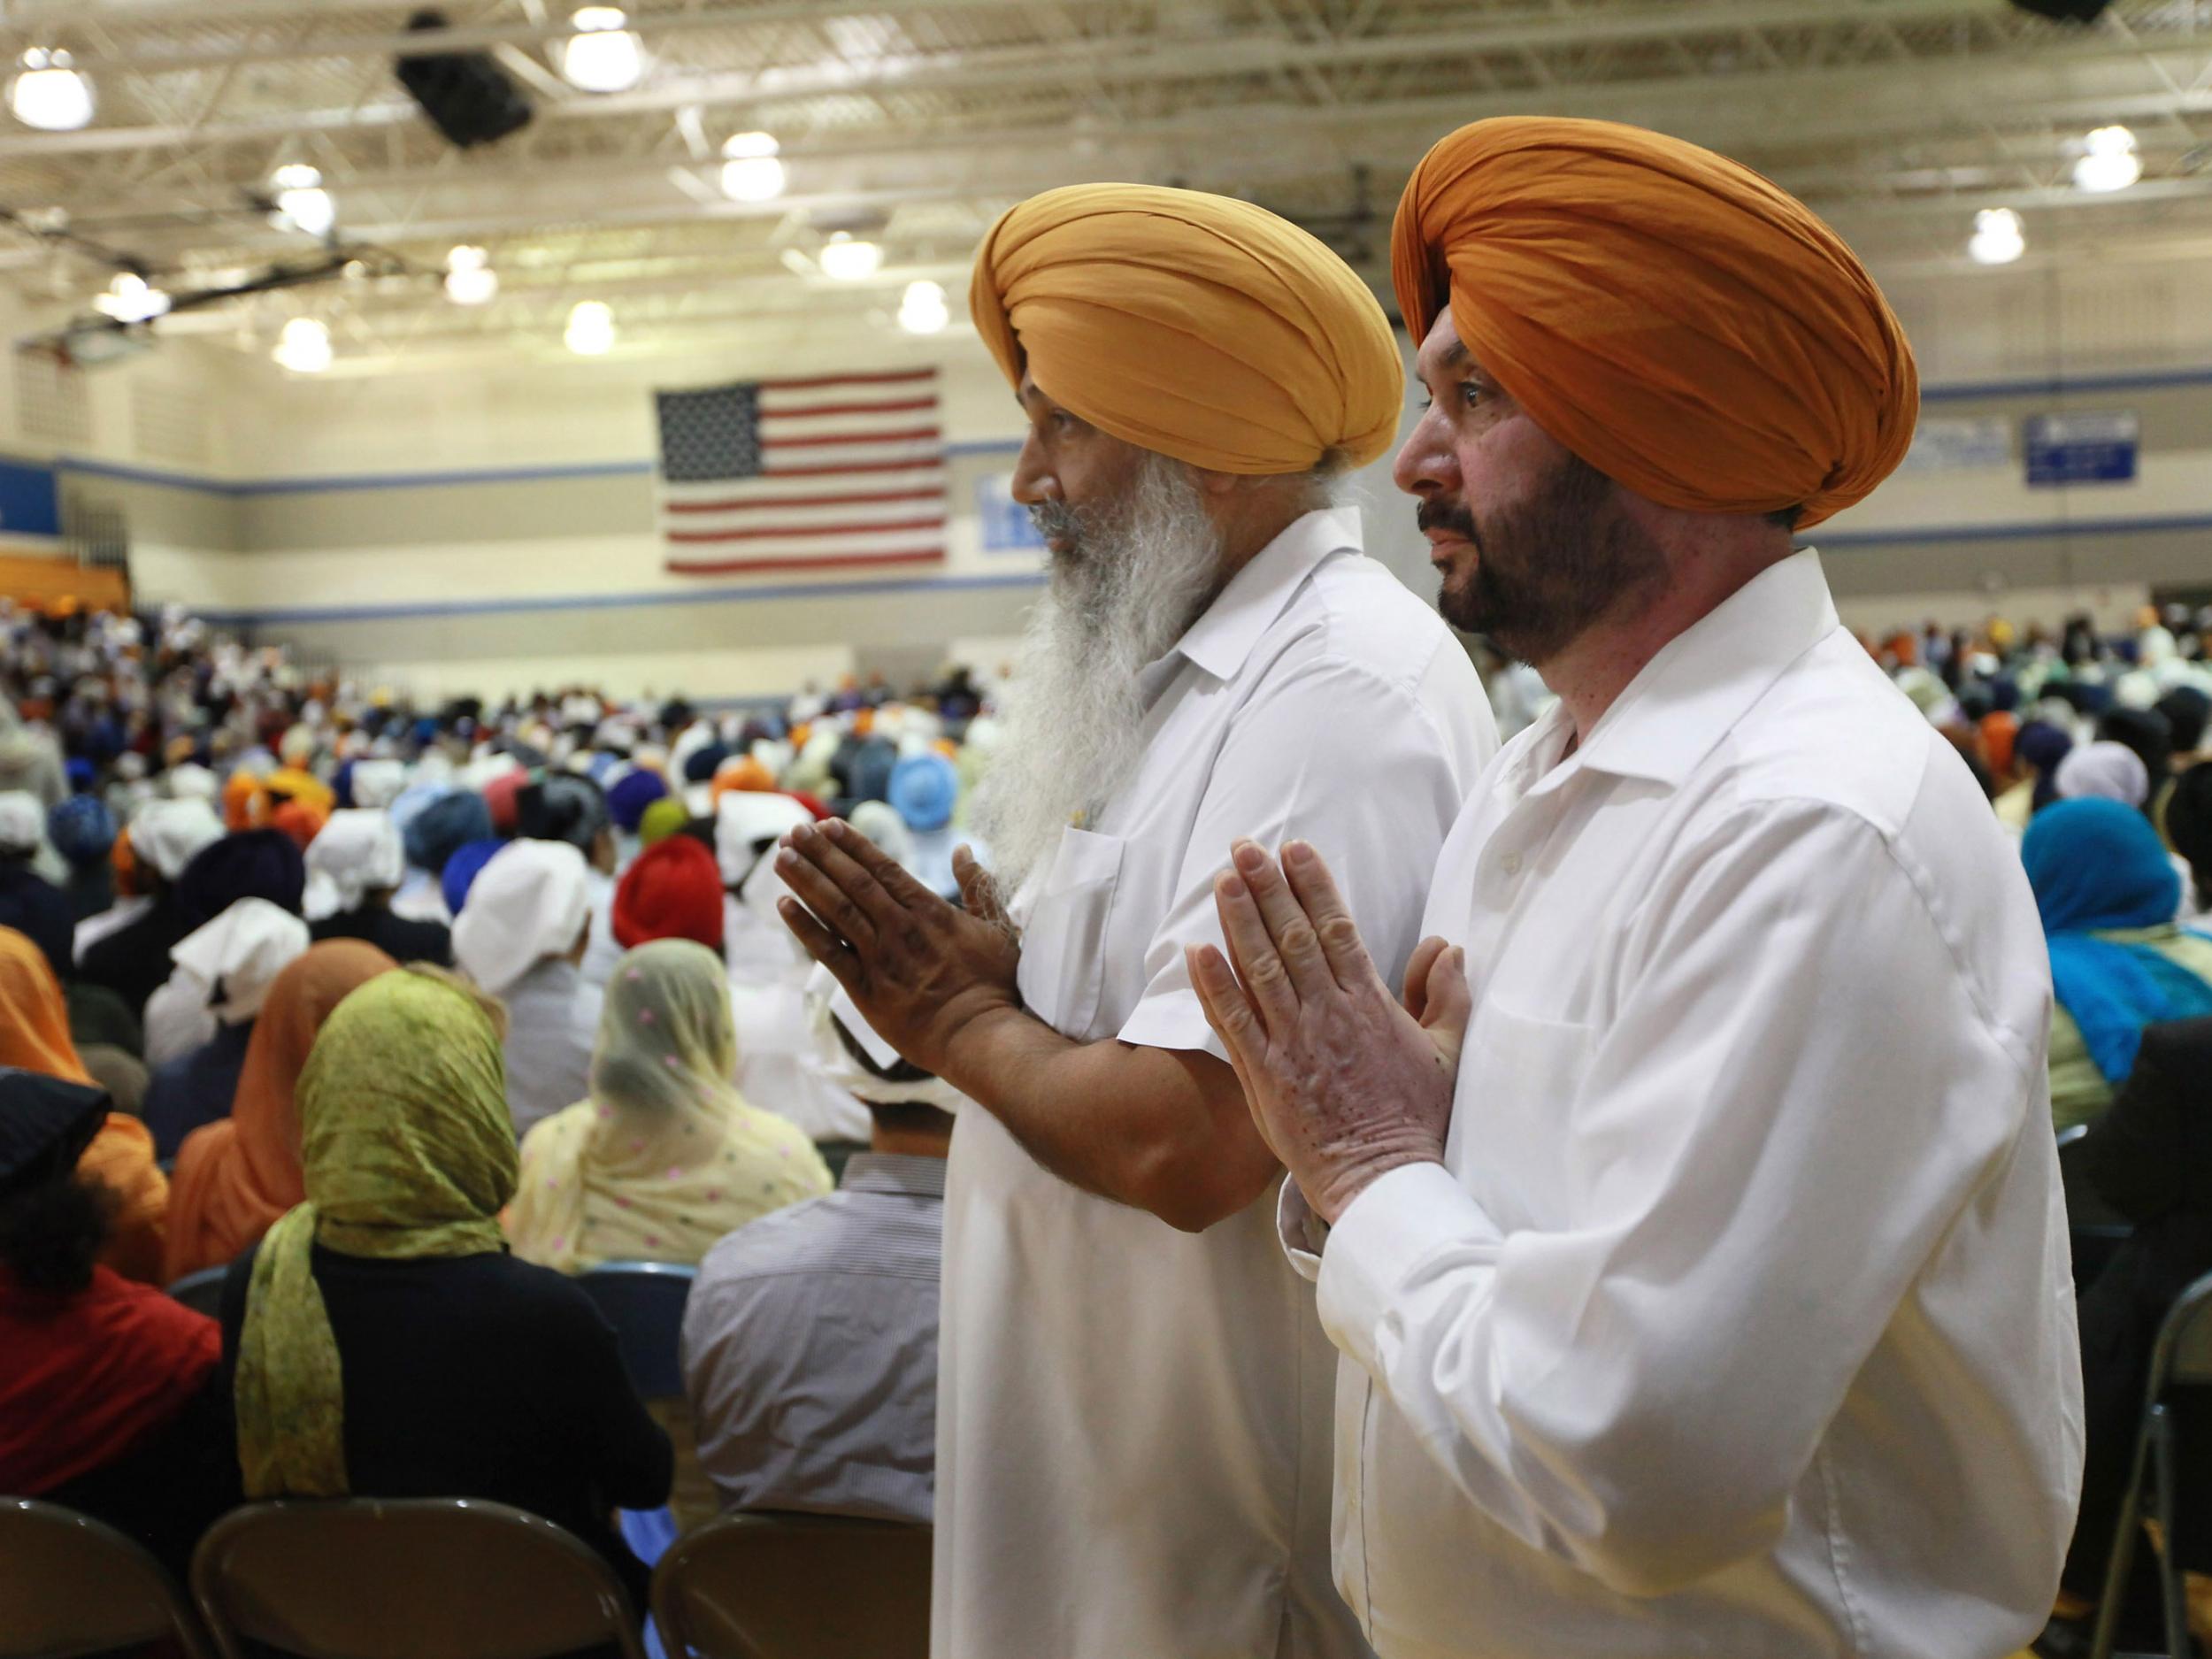 Sikhs have previously been the mistaken targets of anti-Muslim hate crime in America